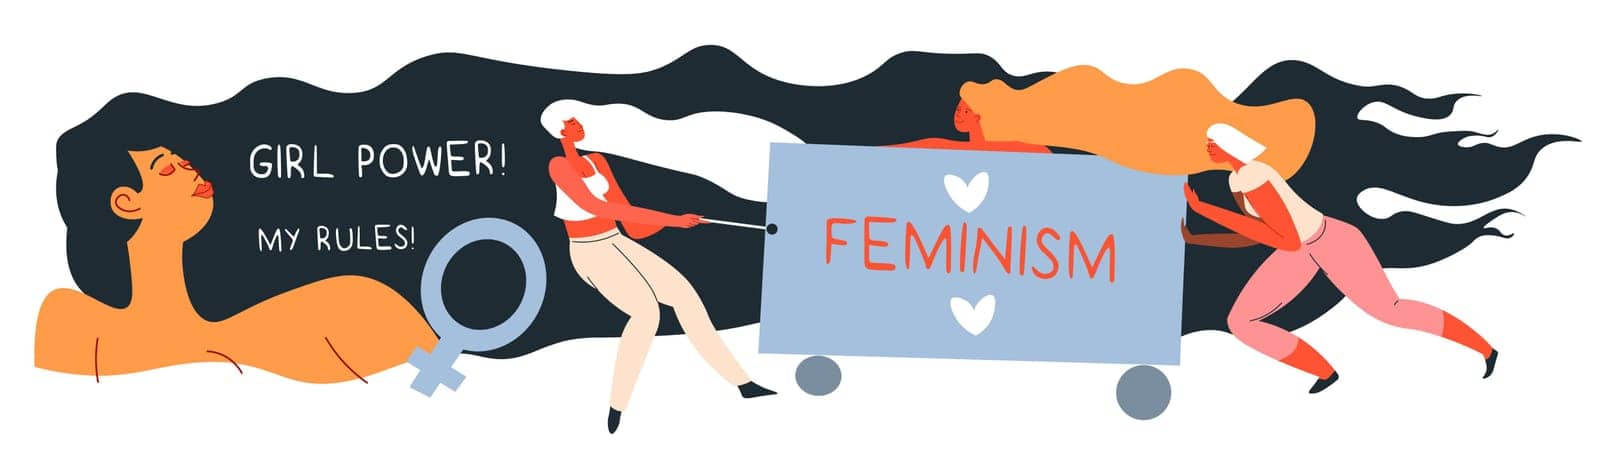 Fighting for women rights and empowerment. Ladies protesting against discrimination and inequality. Inspiration for ladies. Feminist movement and activists with protest. Vector in flat style